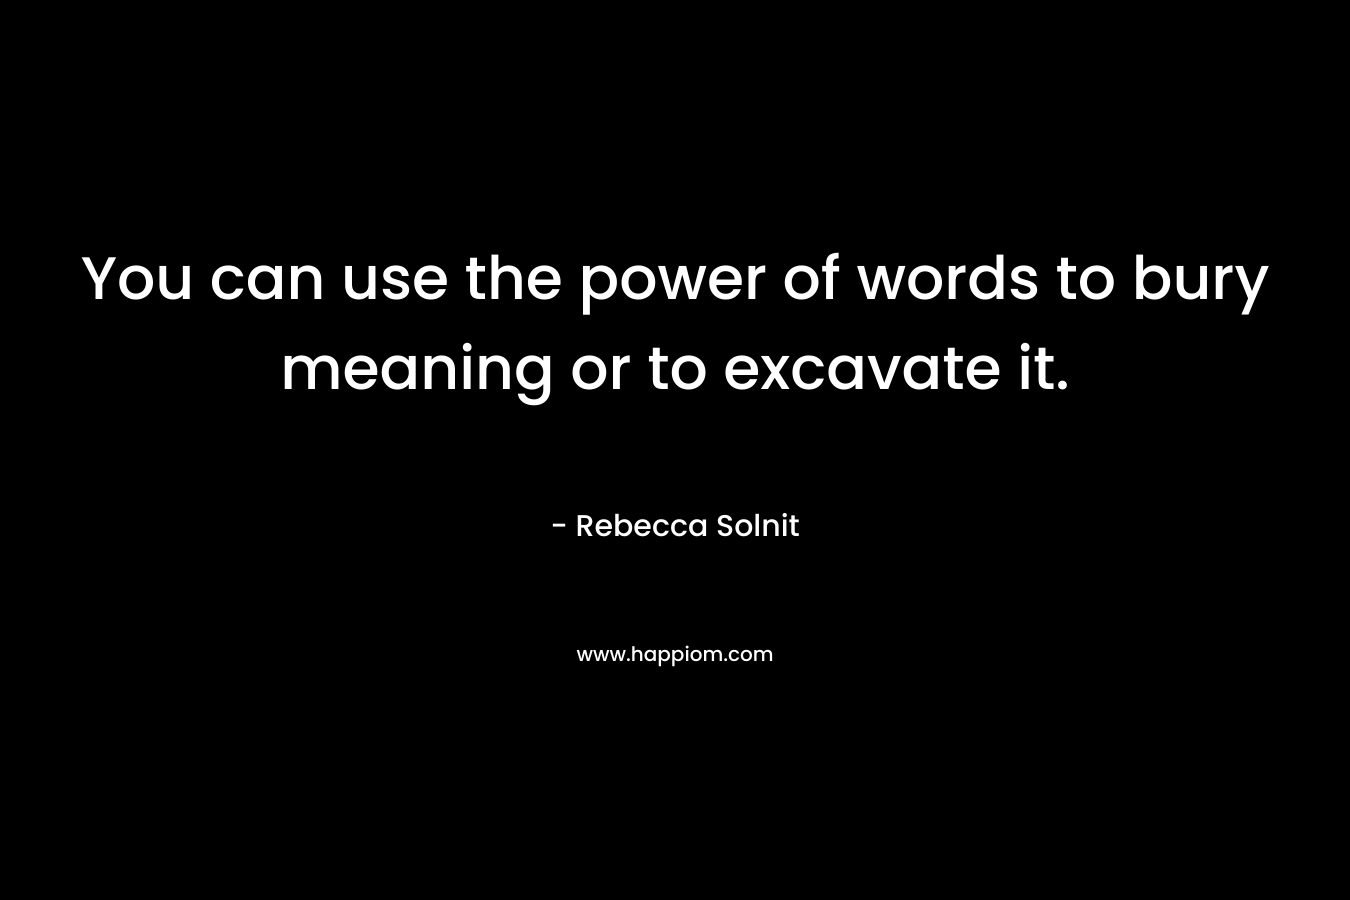 You can use the power of words to bury meaning or to excavate it.